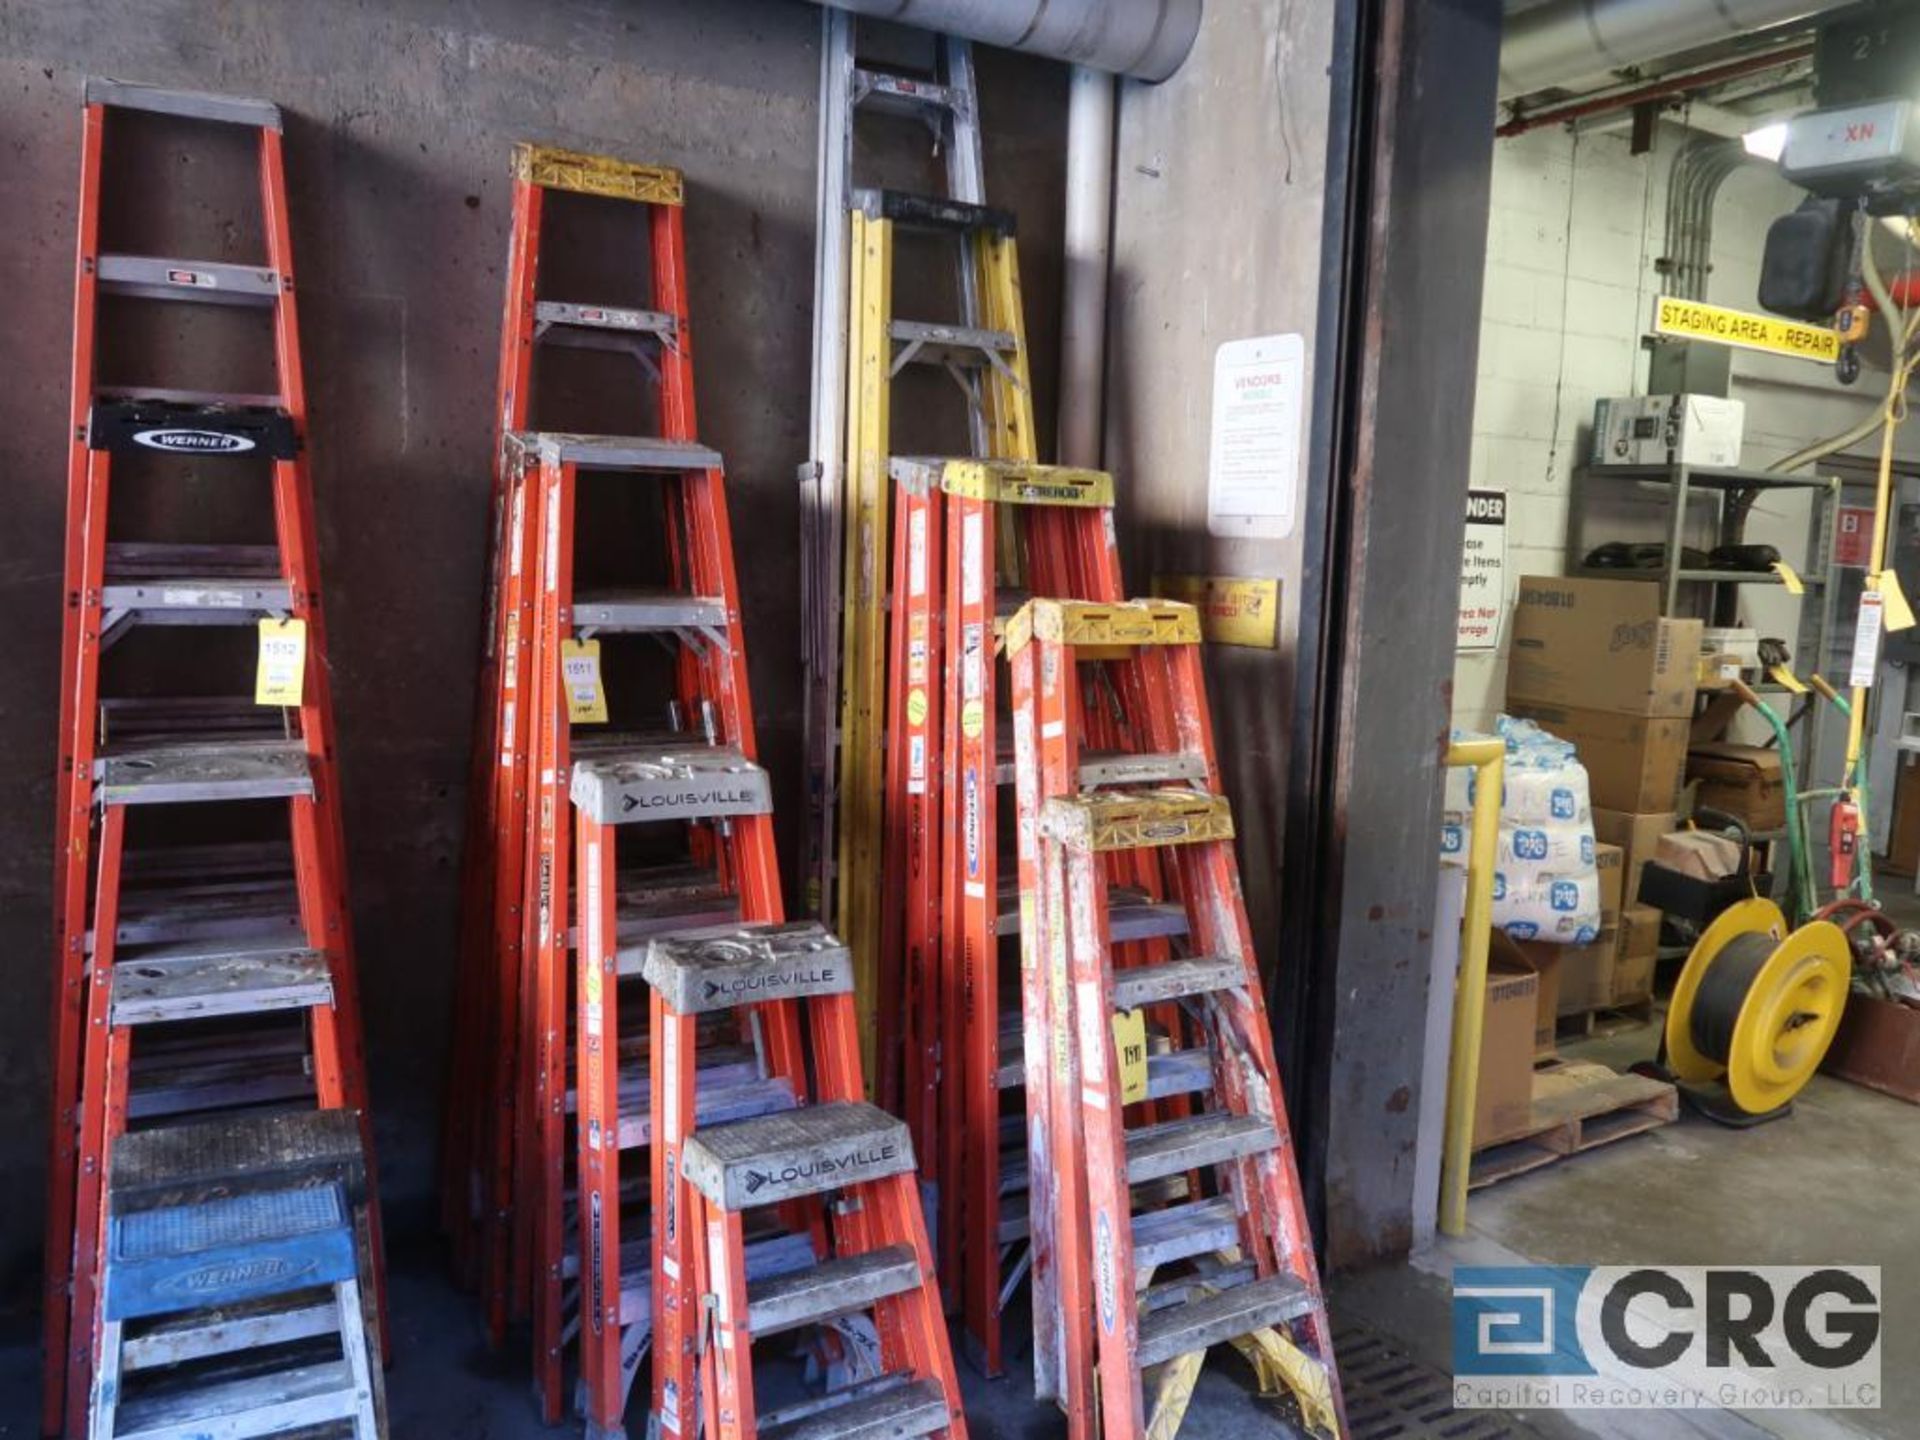 Lot of (12) ladders including (1) aluminum 10 step, (2) 7 step, (4) 5 step, (2) 3 step, (2) 2